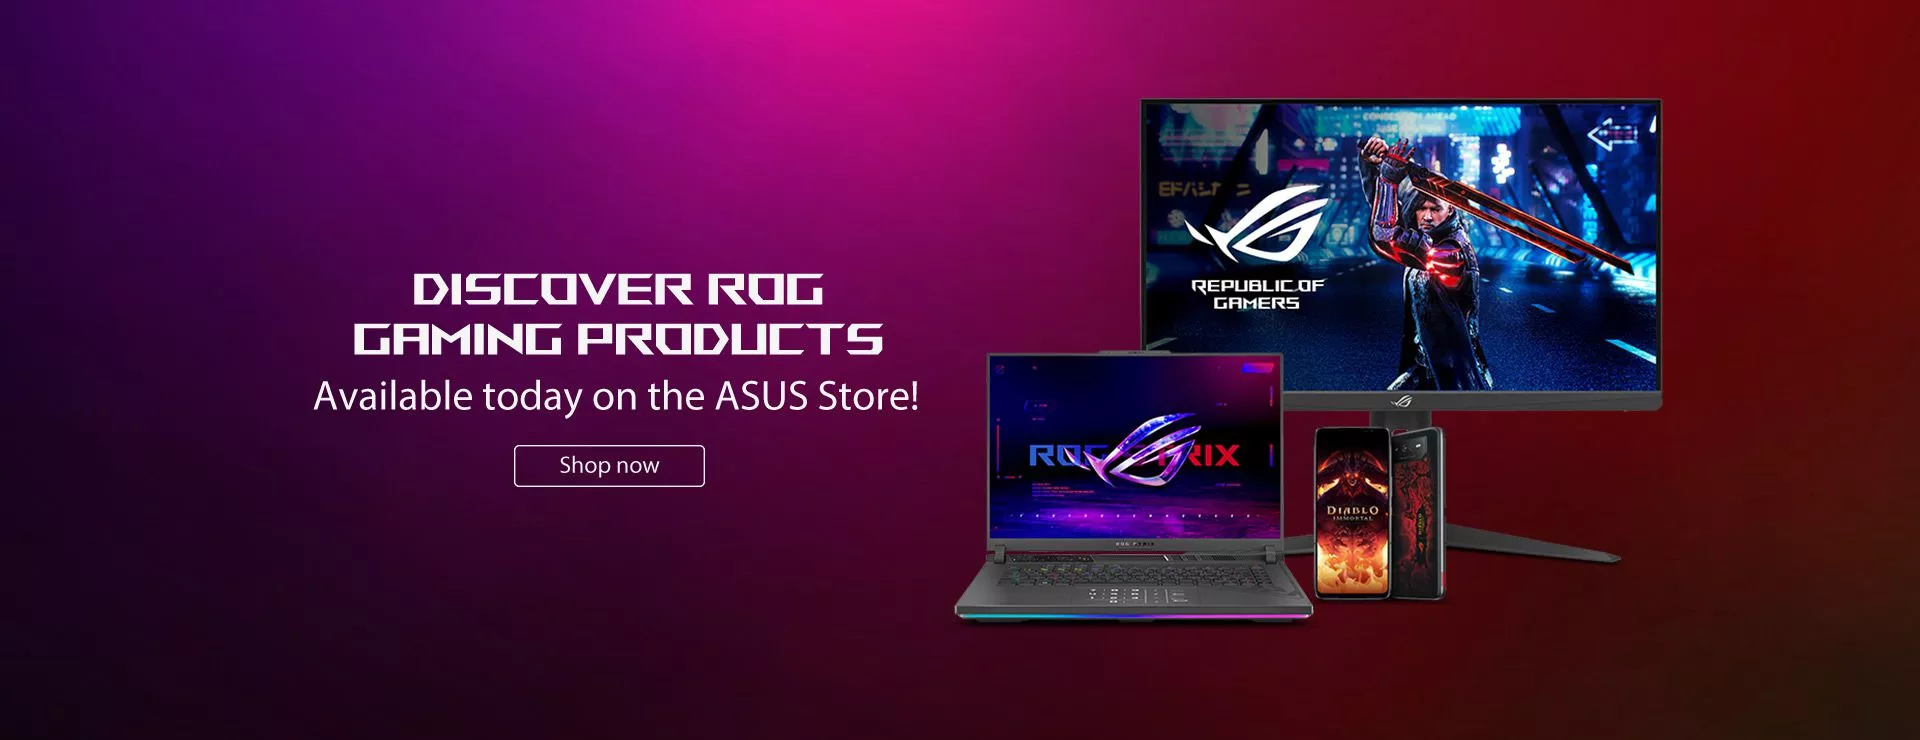 ASUS ROG Gaming Products Available today on the ASUS Store!  Shop Now